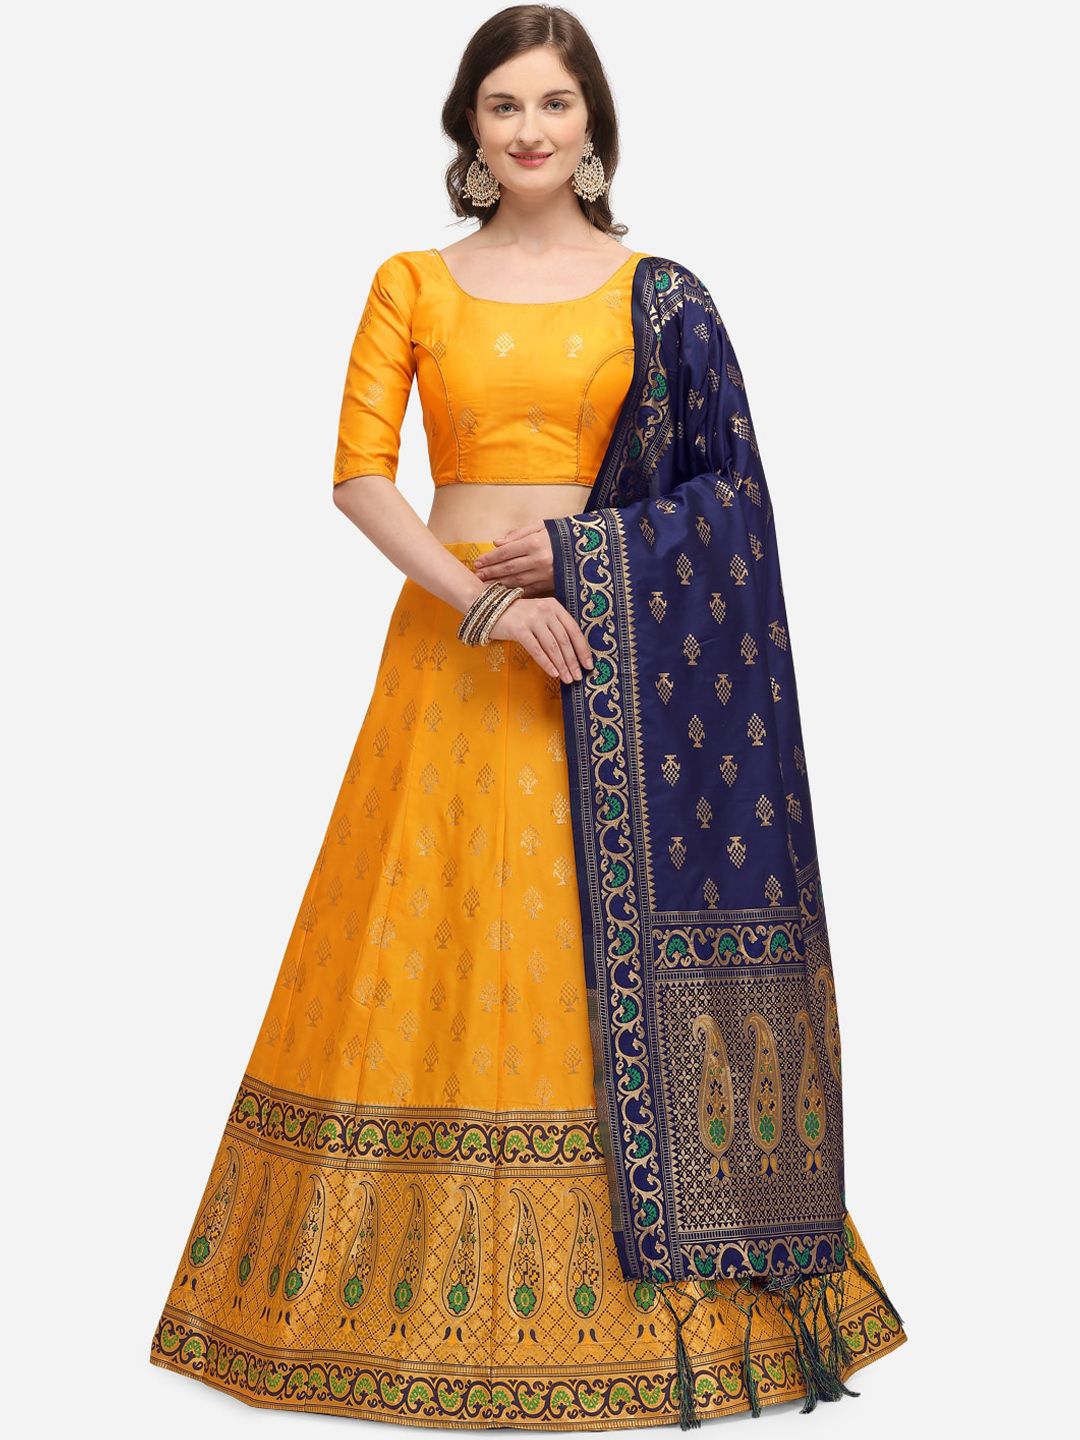 JATRIQQ Yellow & Navy Blue Woven Design Semi-Stitched Lehenga & Unstitched Blouse with Dupatta Price in India